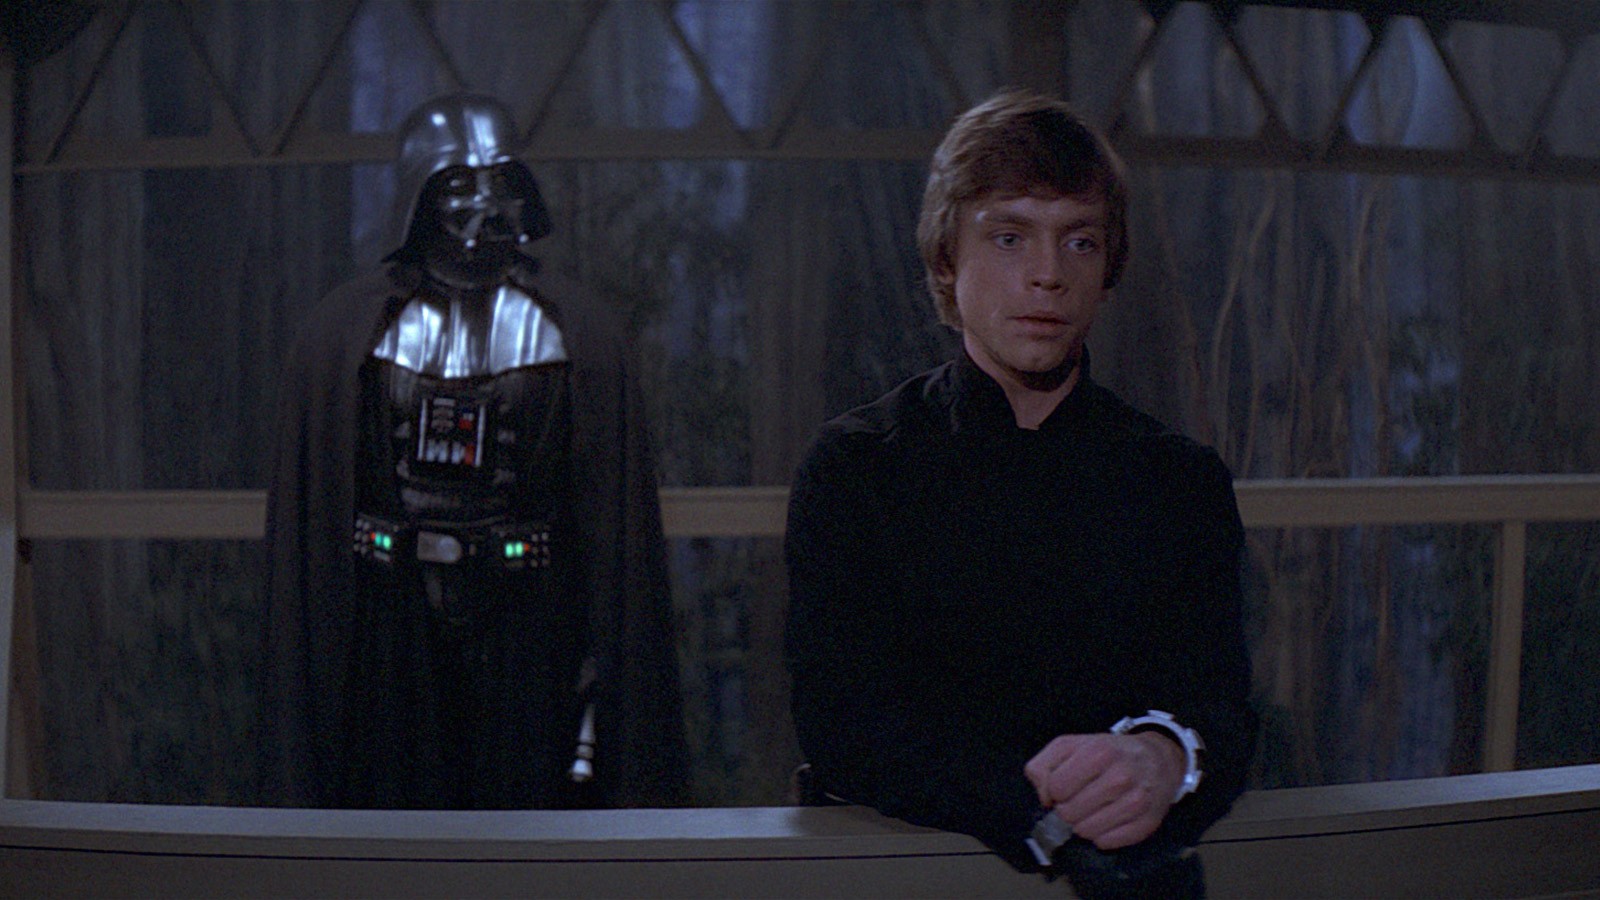 Star Wars: Episode VI- Return of the Jedi had the perfect ending to the trilogy